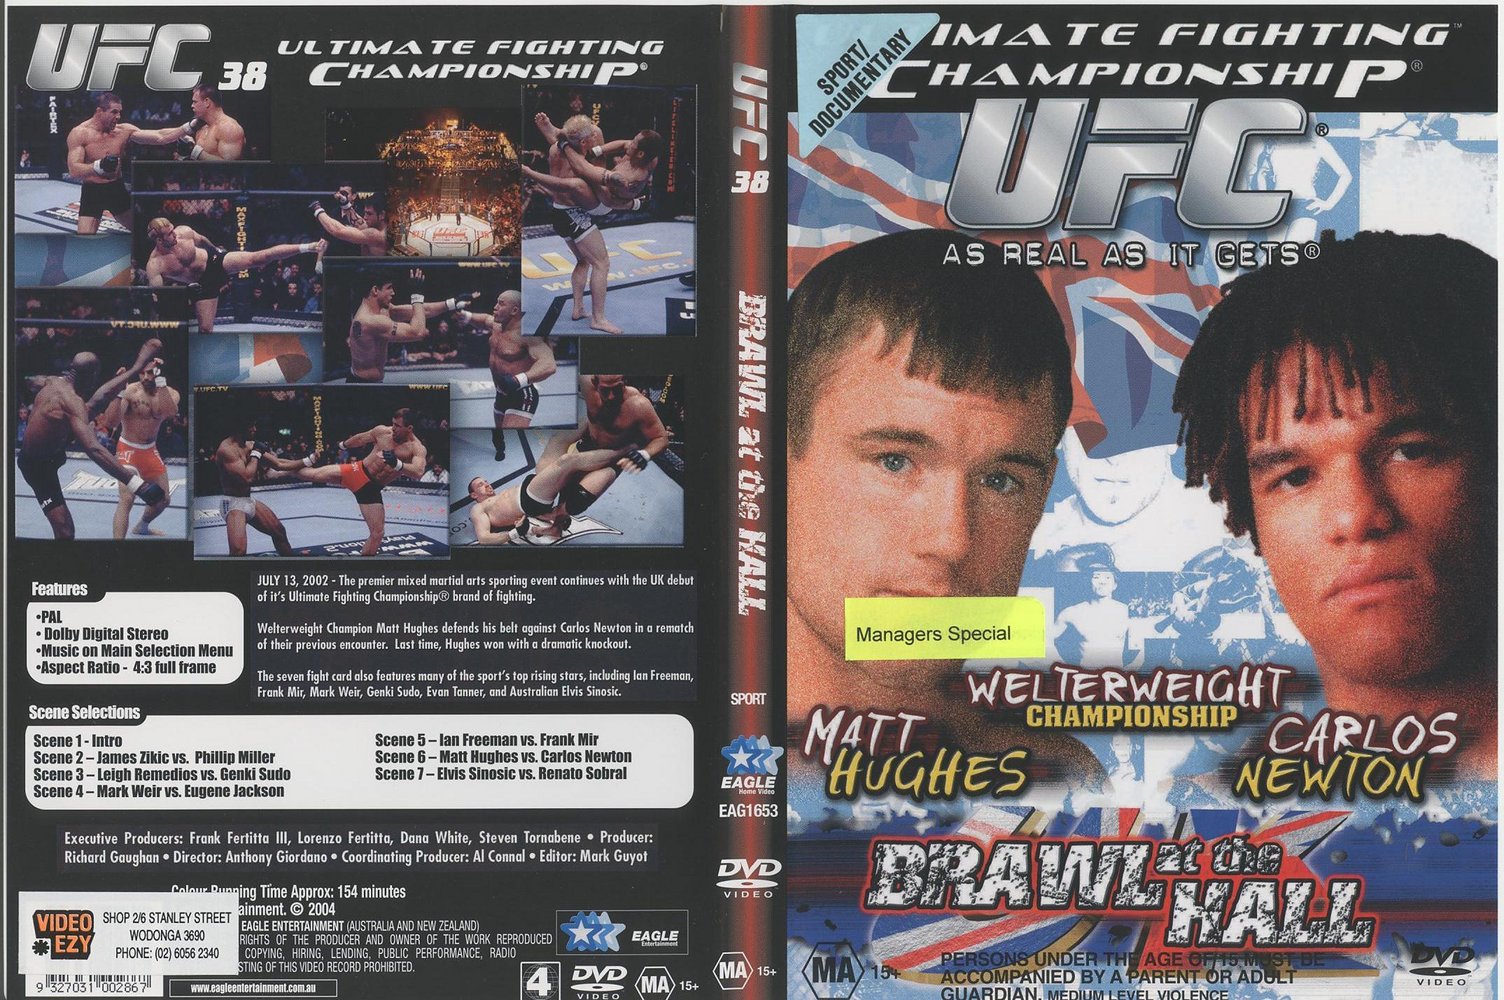 Jaquette DVD Ufc 38 Brawl At The Hall